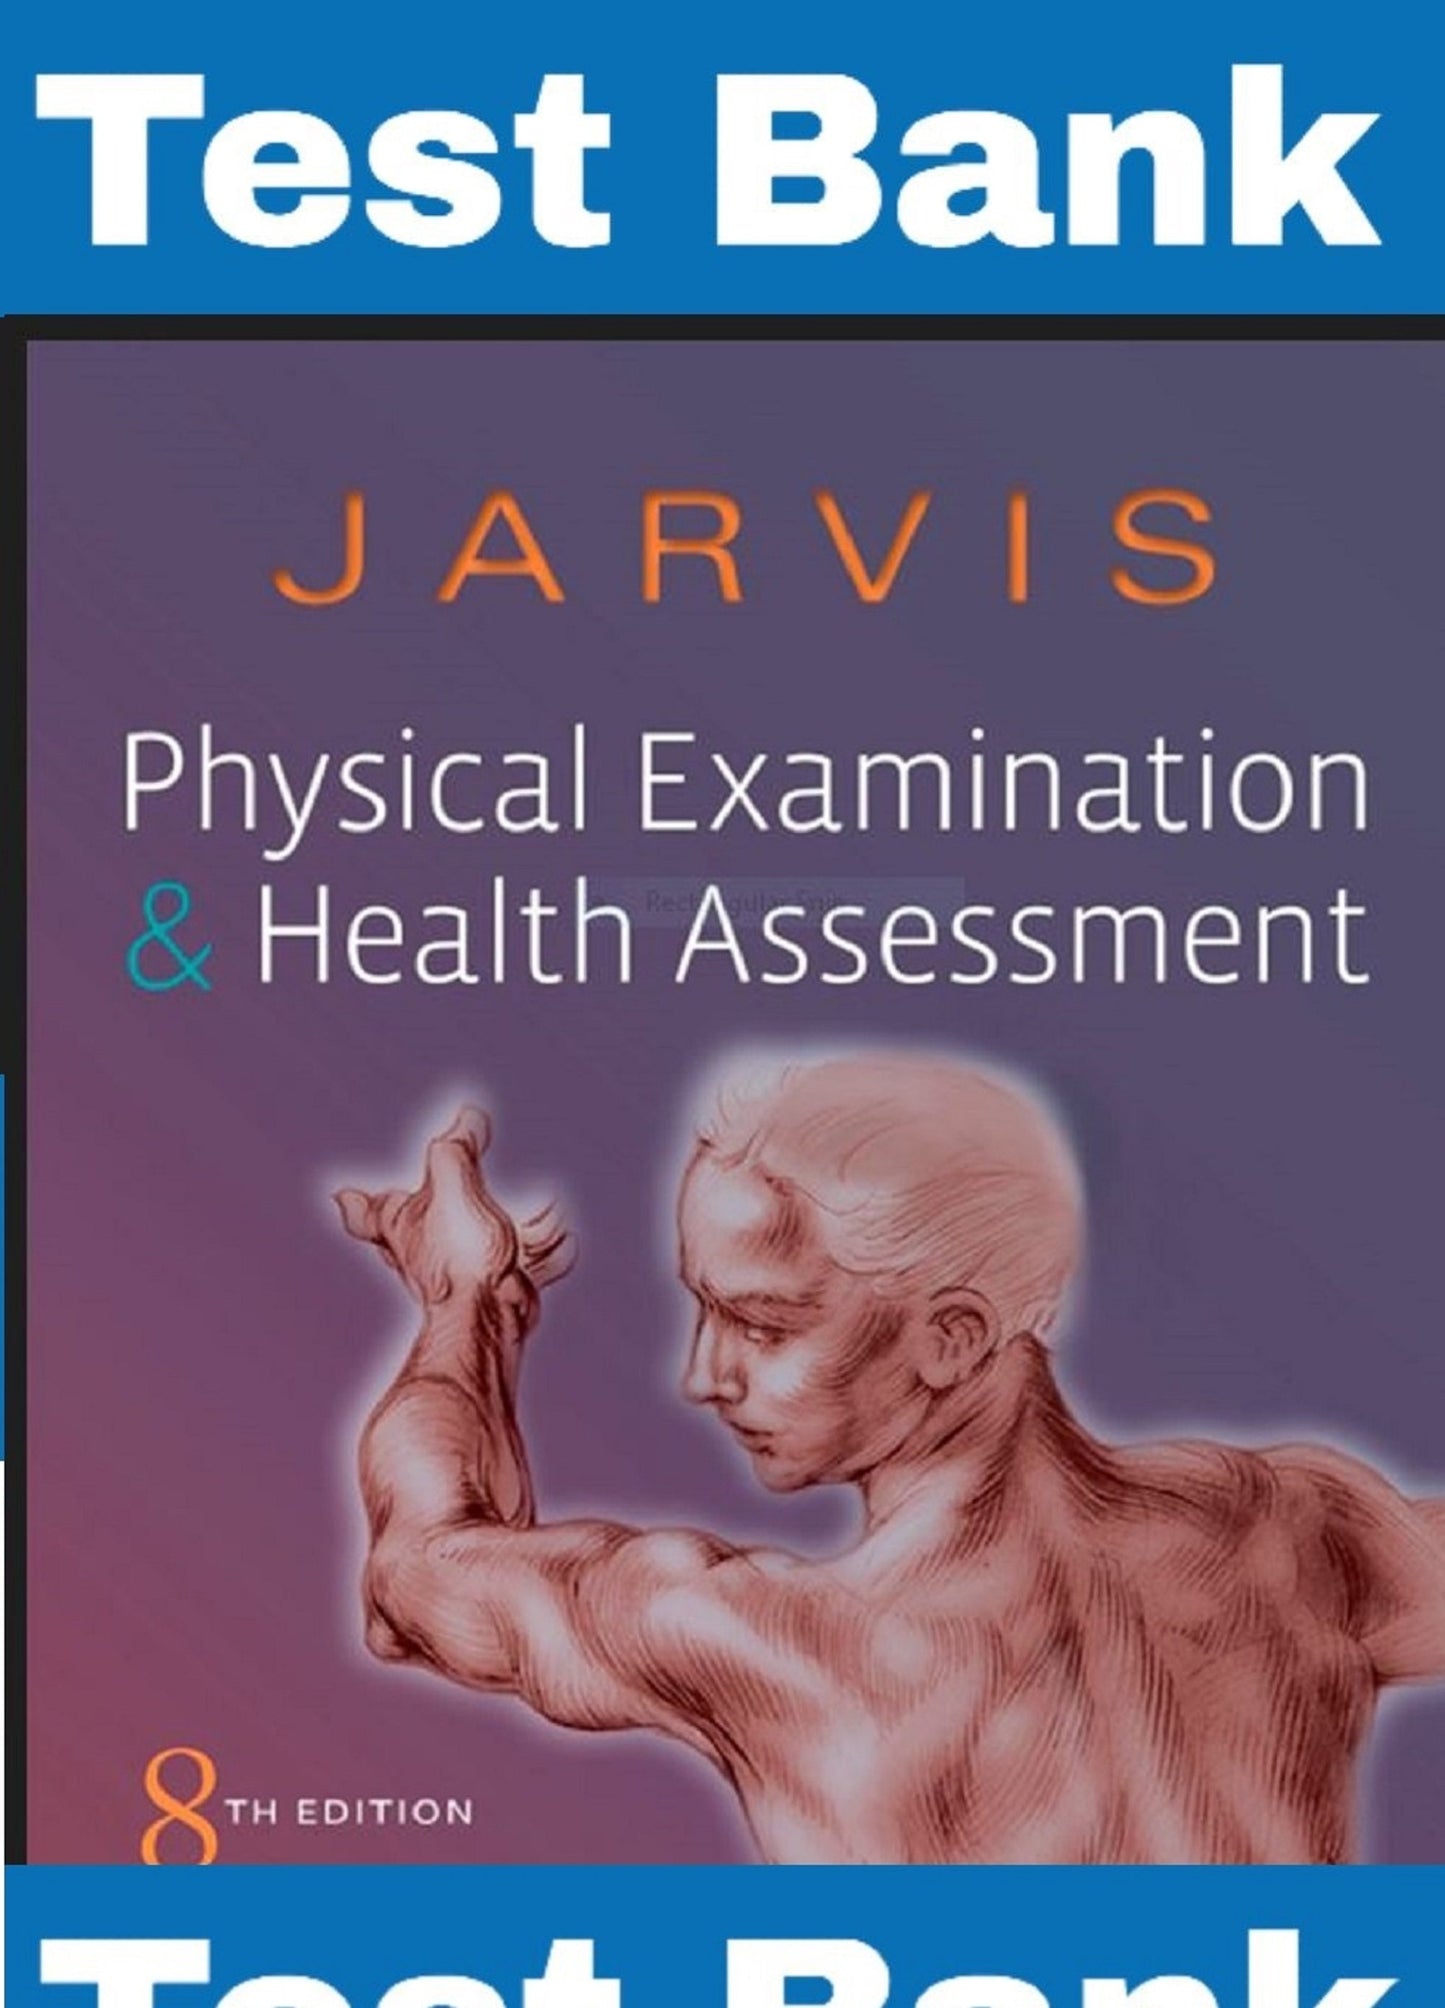 Test Bank Physical Examination and Health Assessment JARVIS 8th Edition NURSING